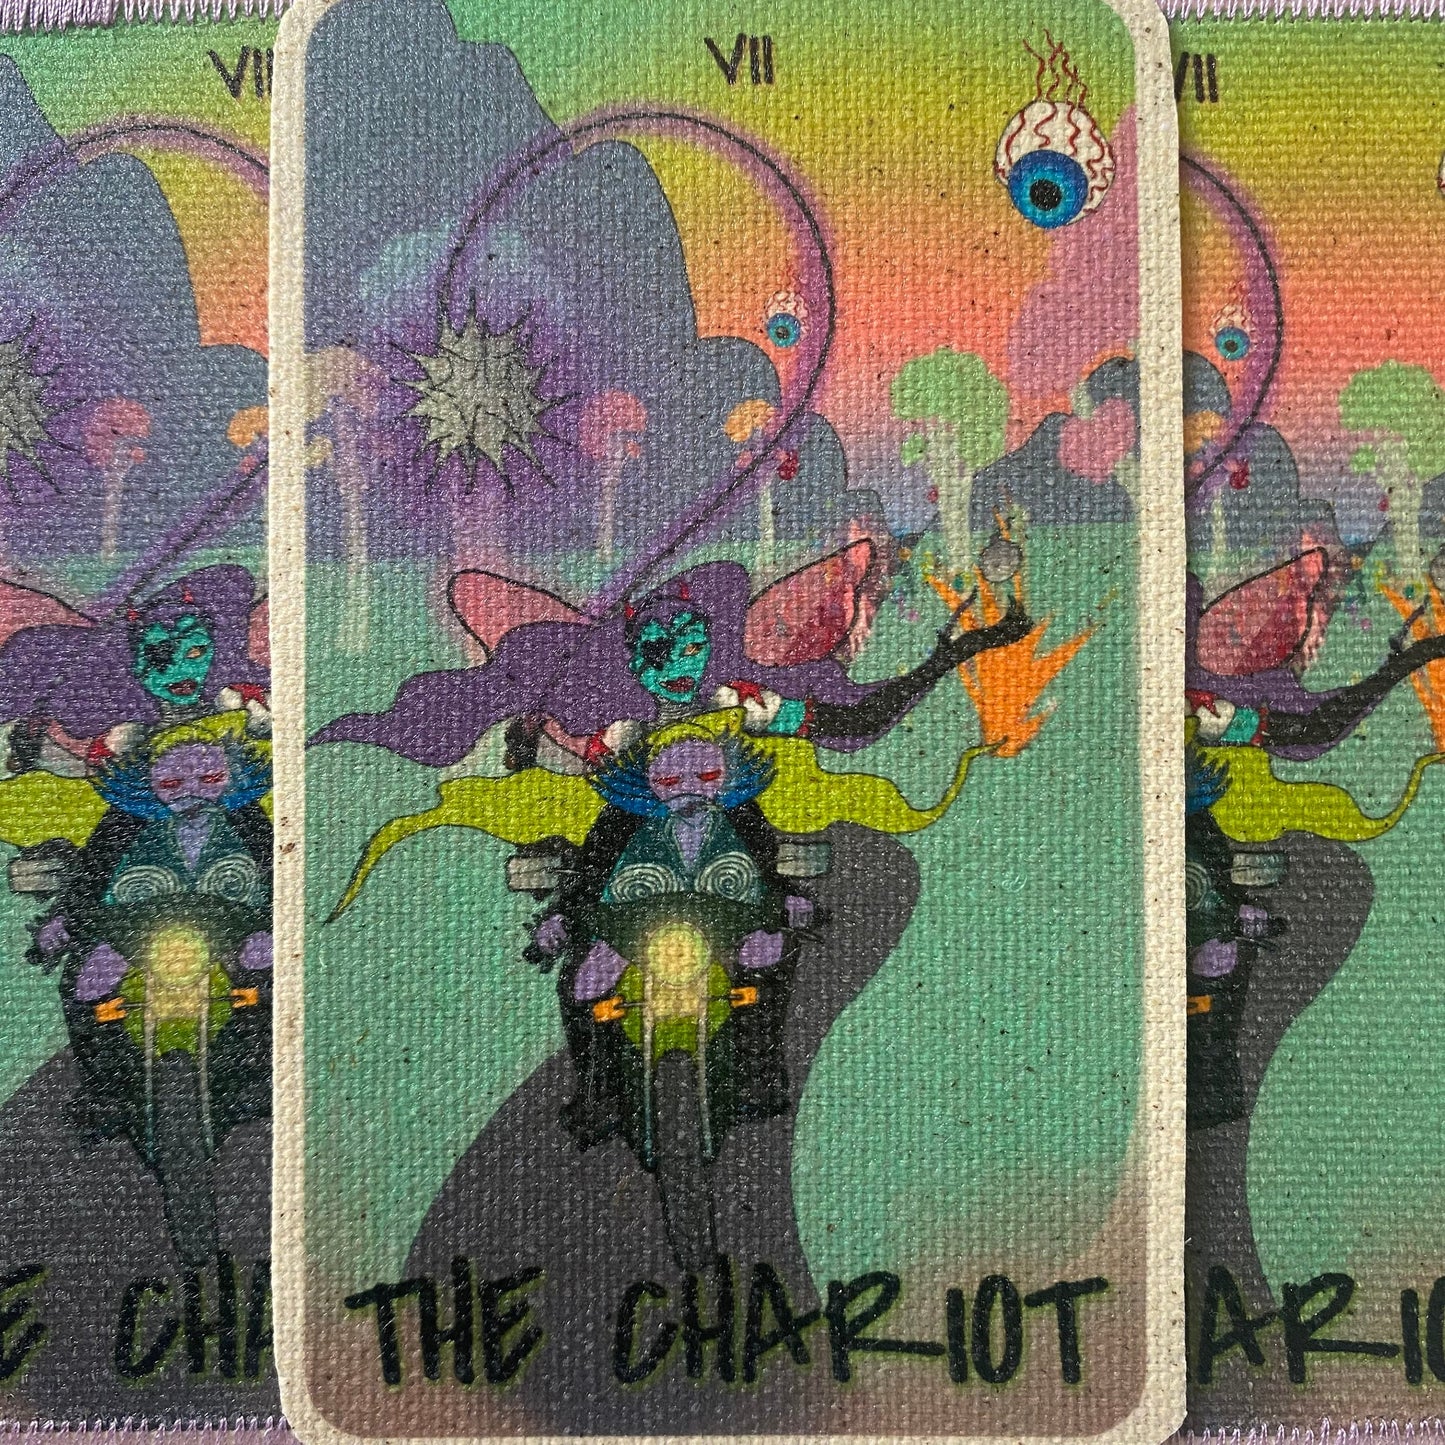 The Chariot Canvas Patch